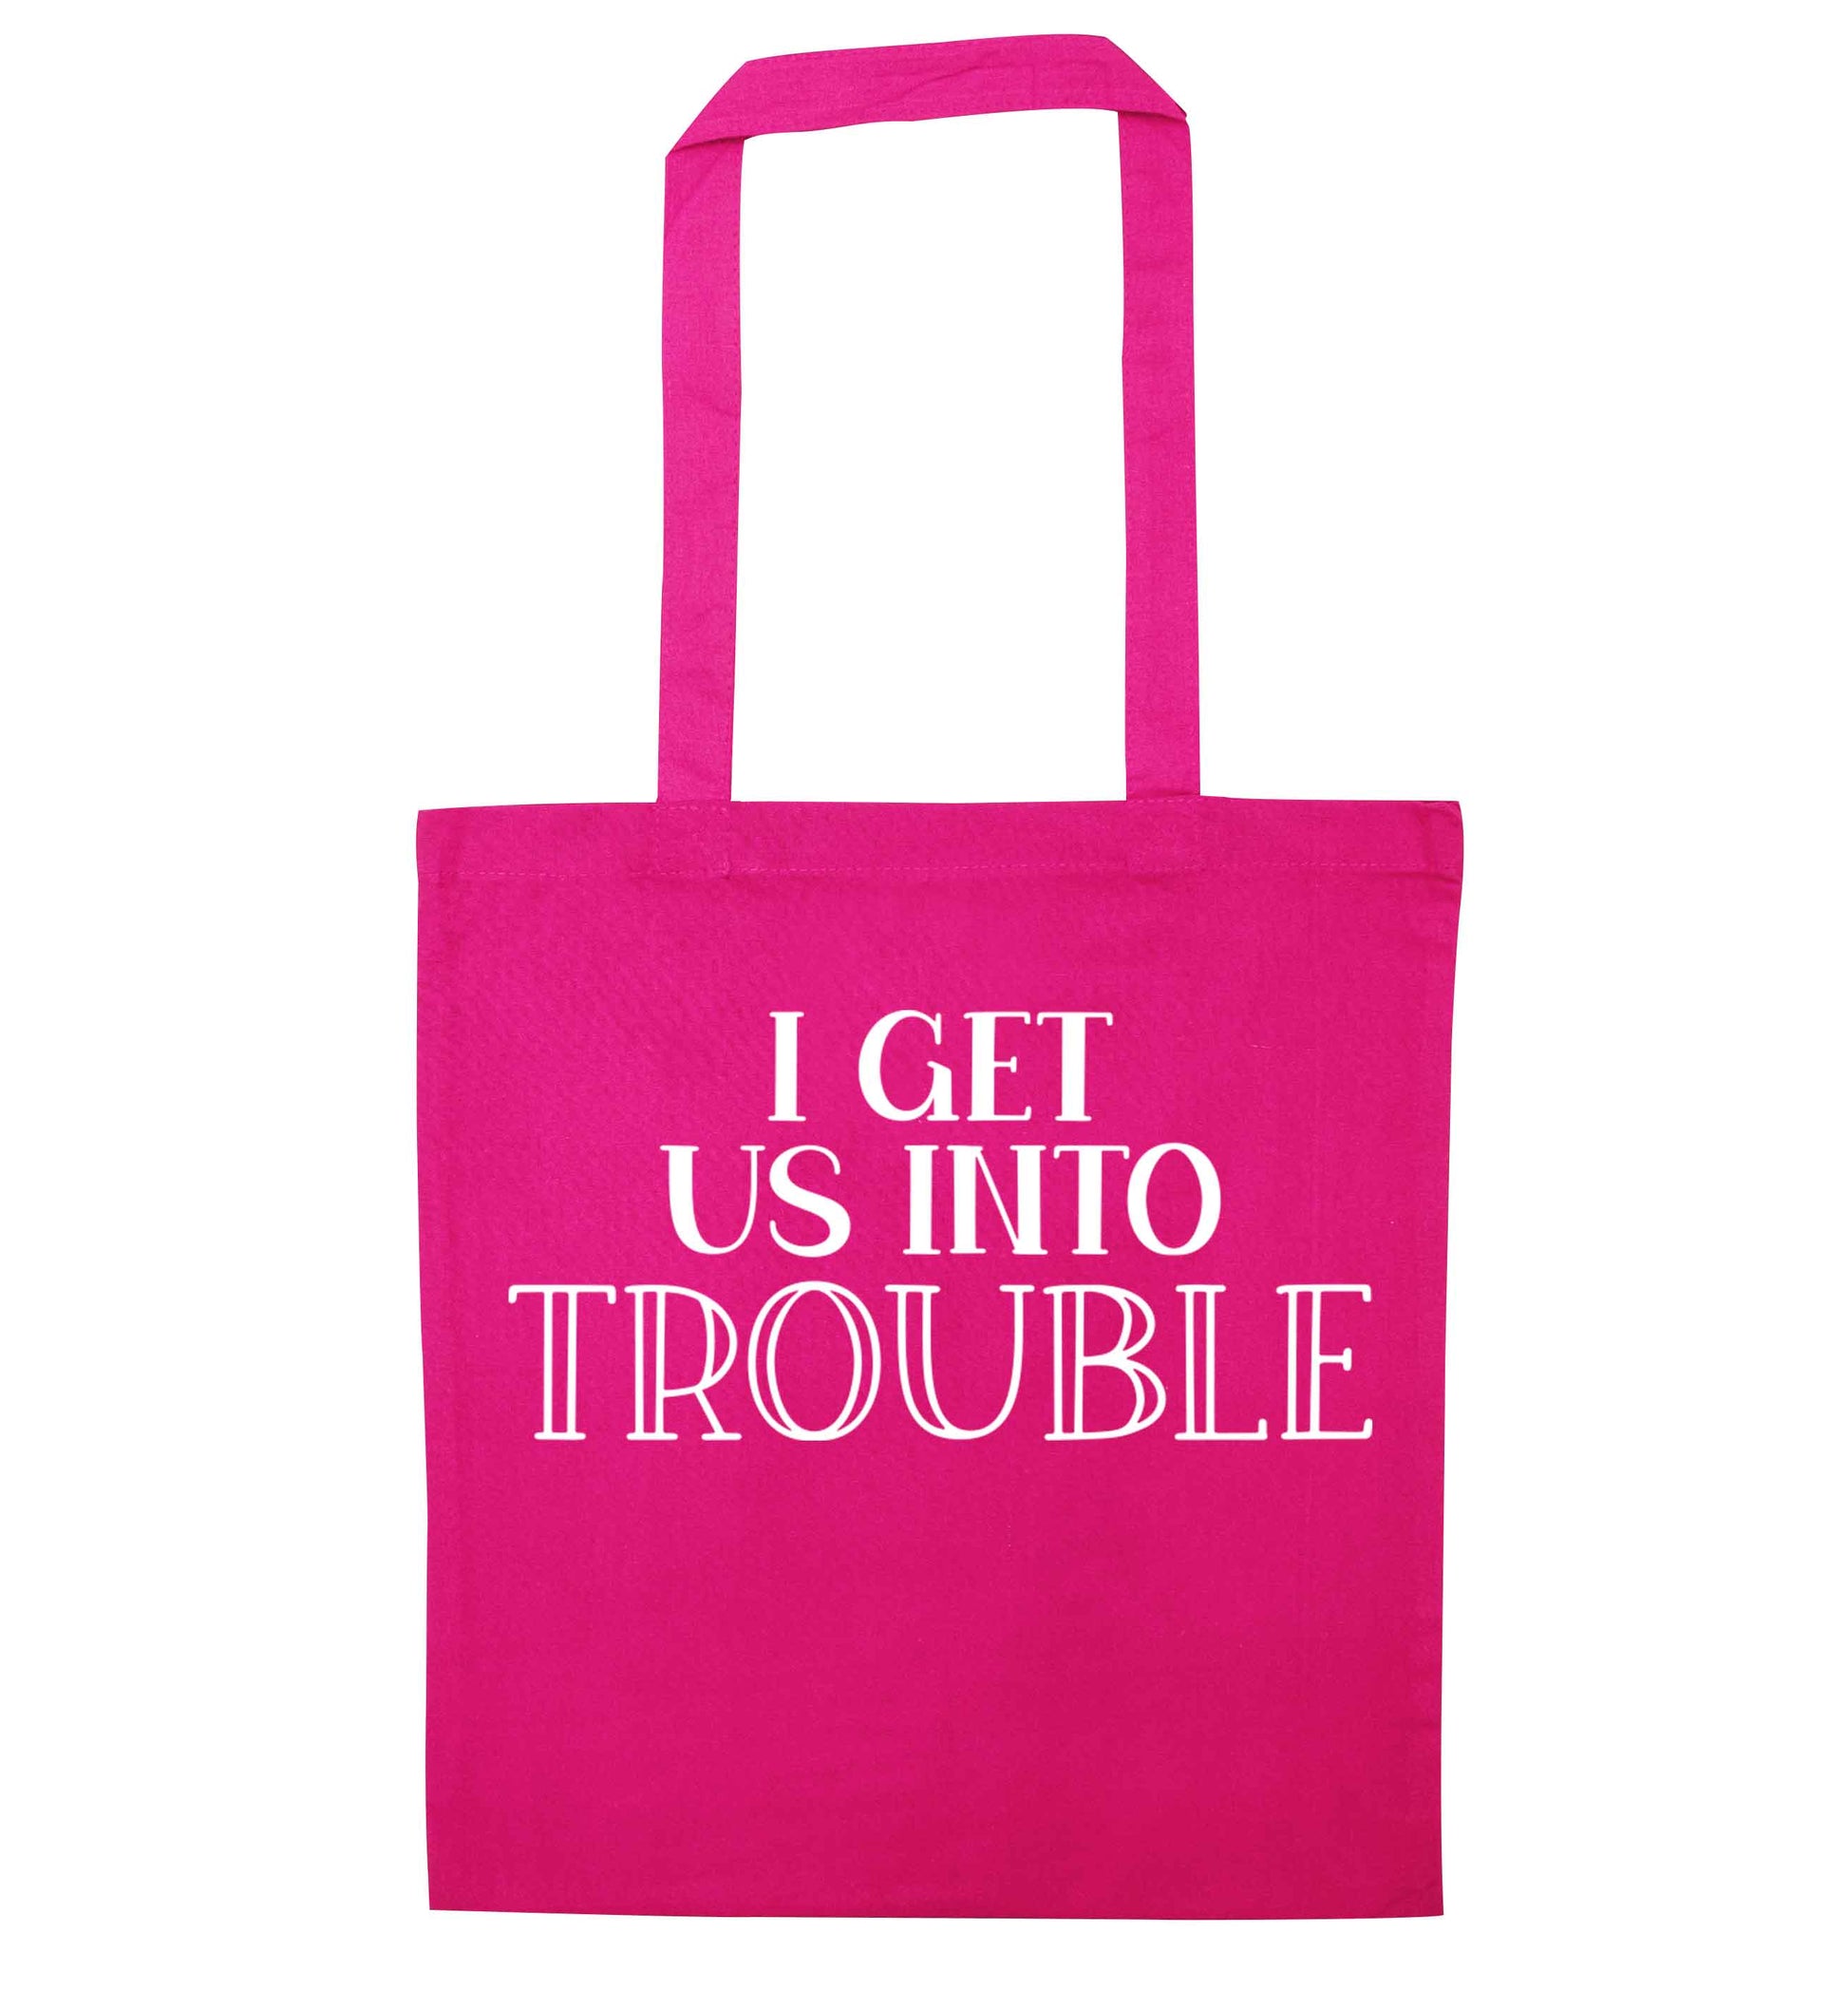 I get us into trouble pink tote bag